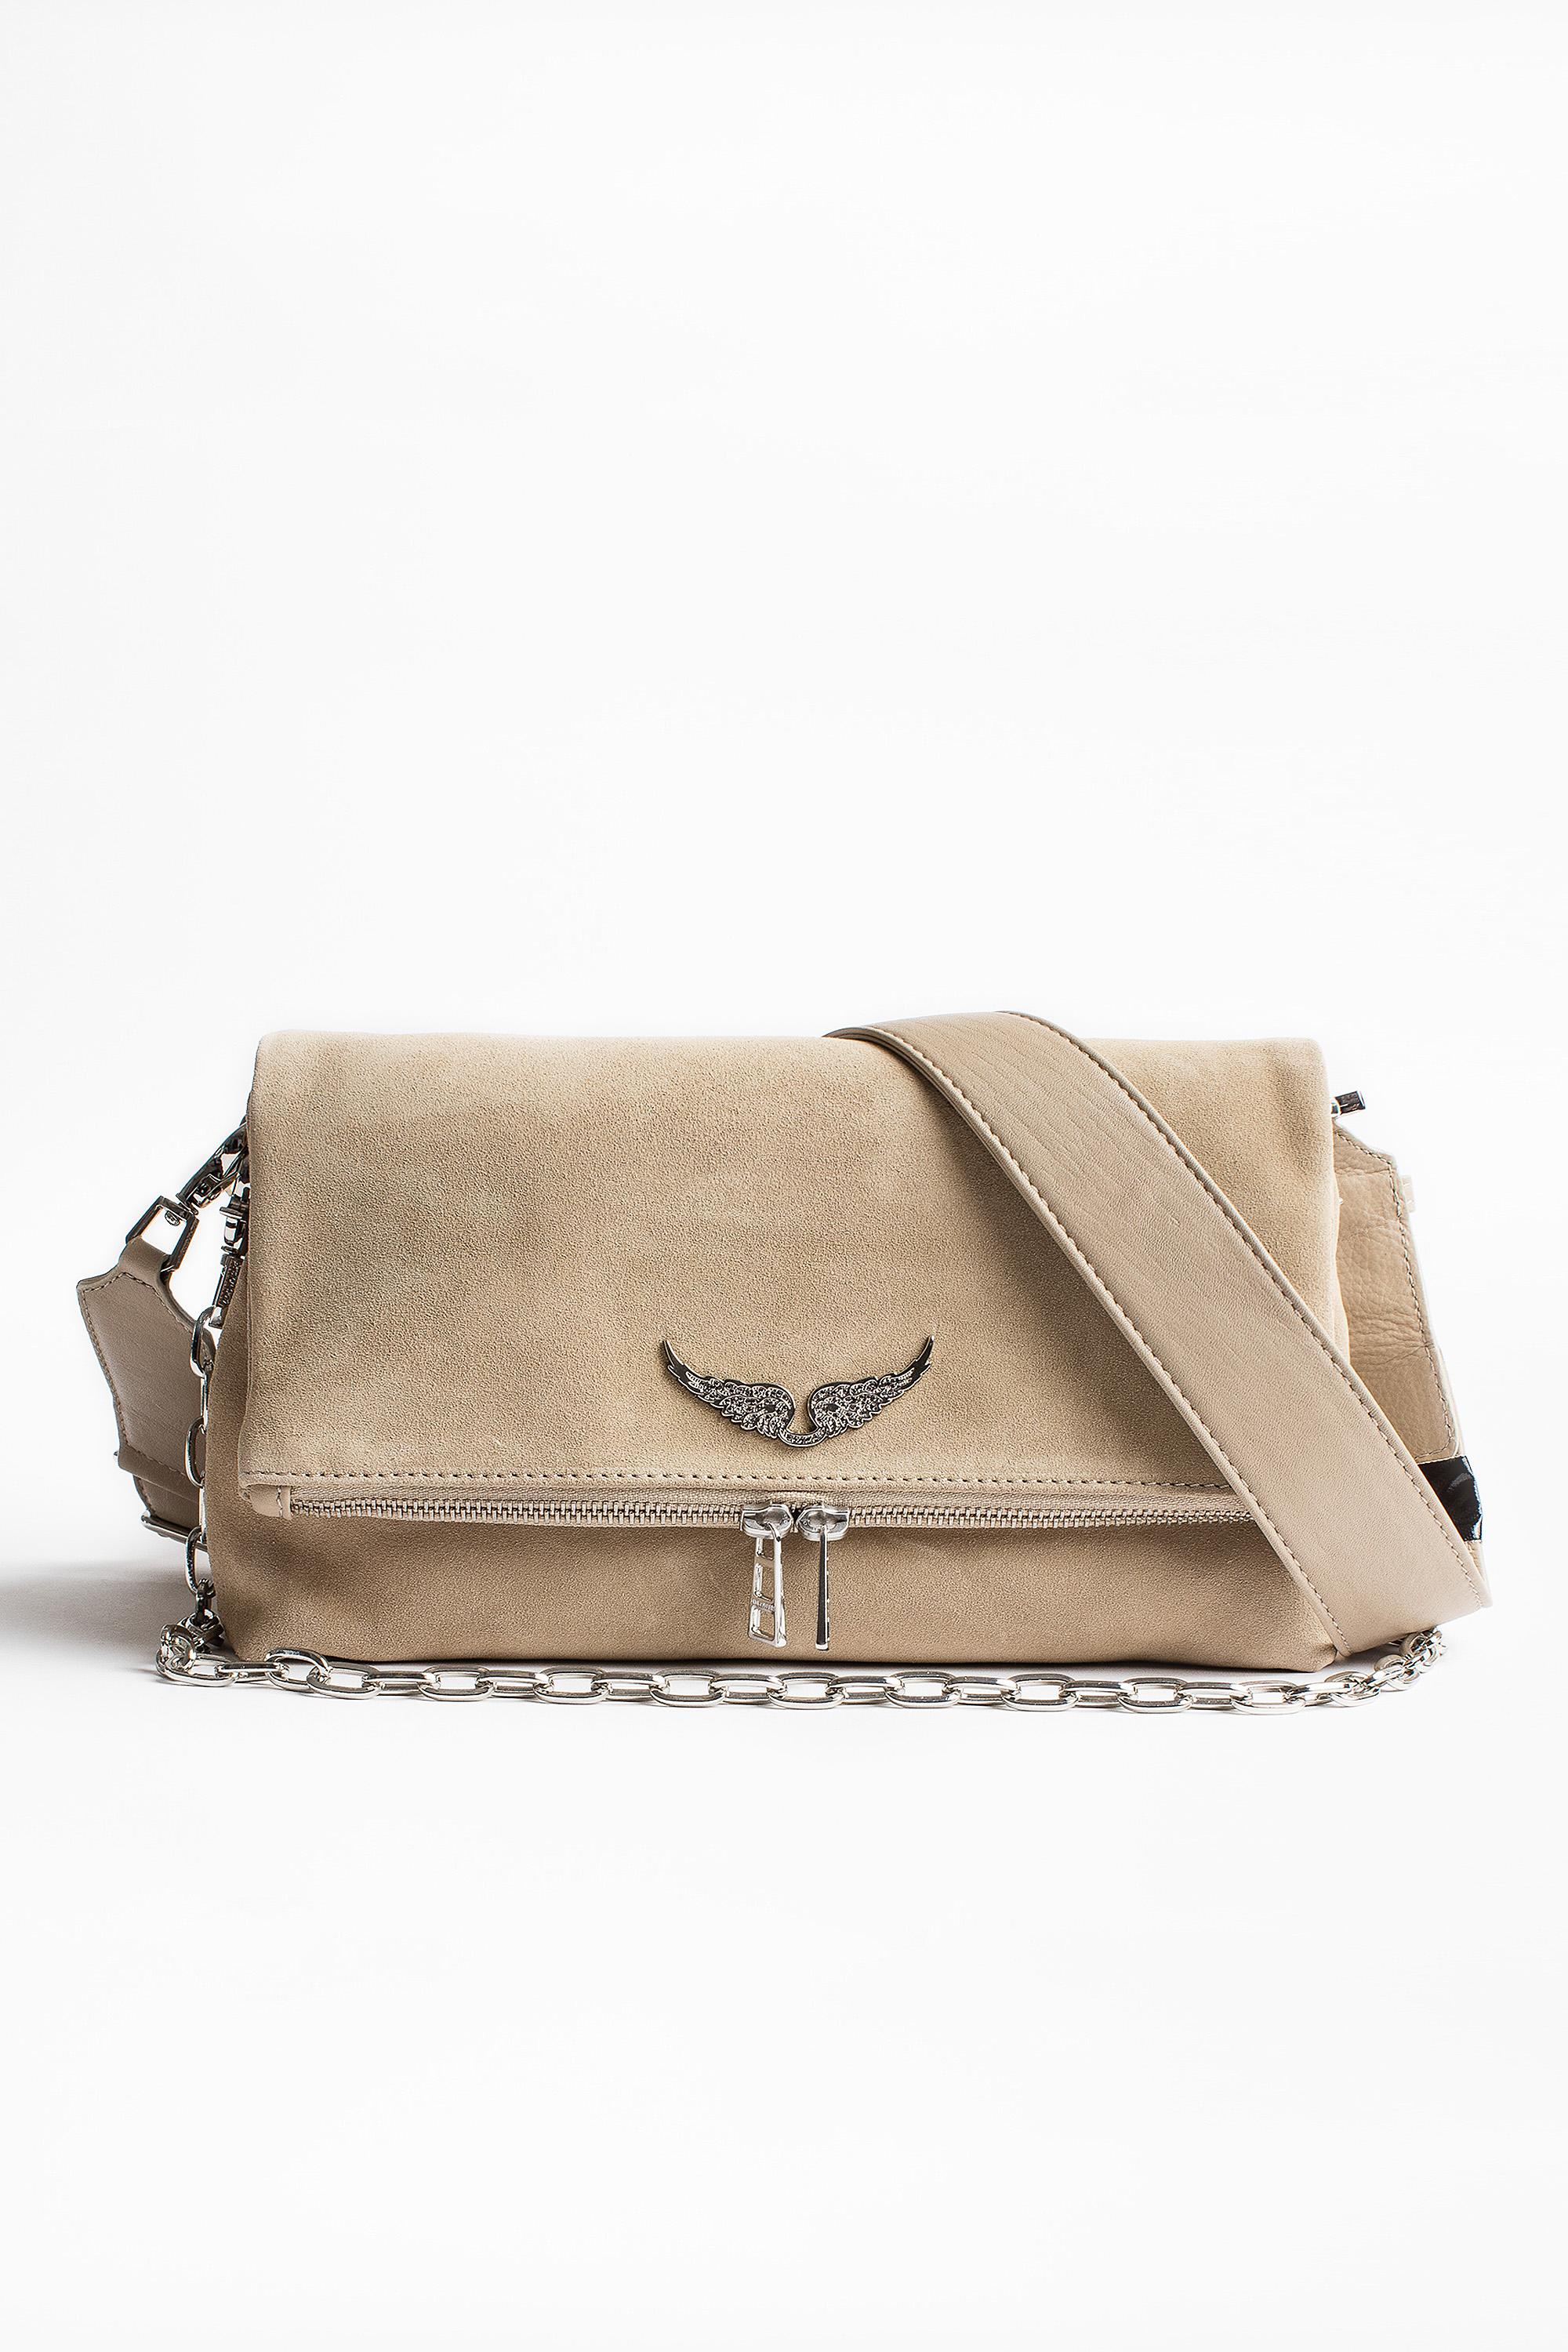 Zadig & Voltaire Rocky Suede Bag in Natural | Lyst